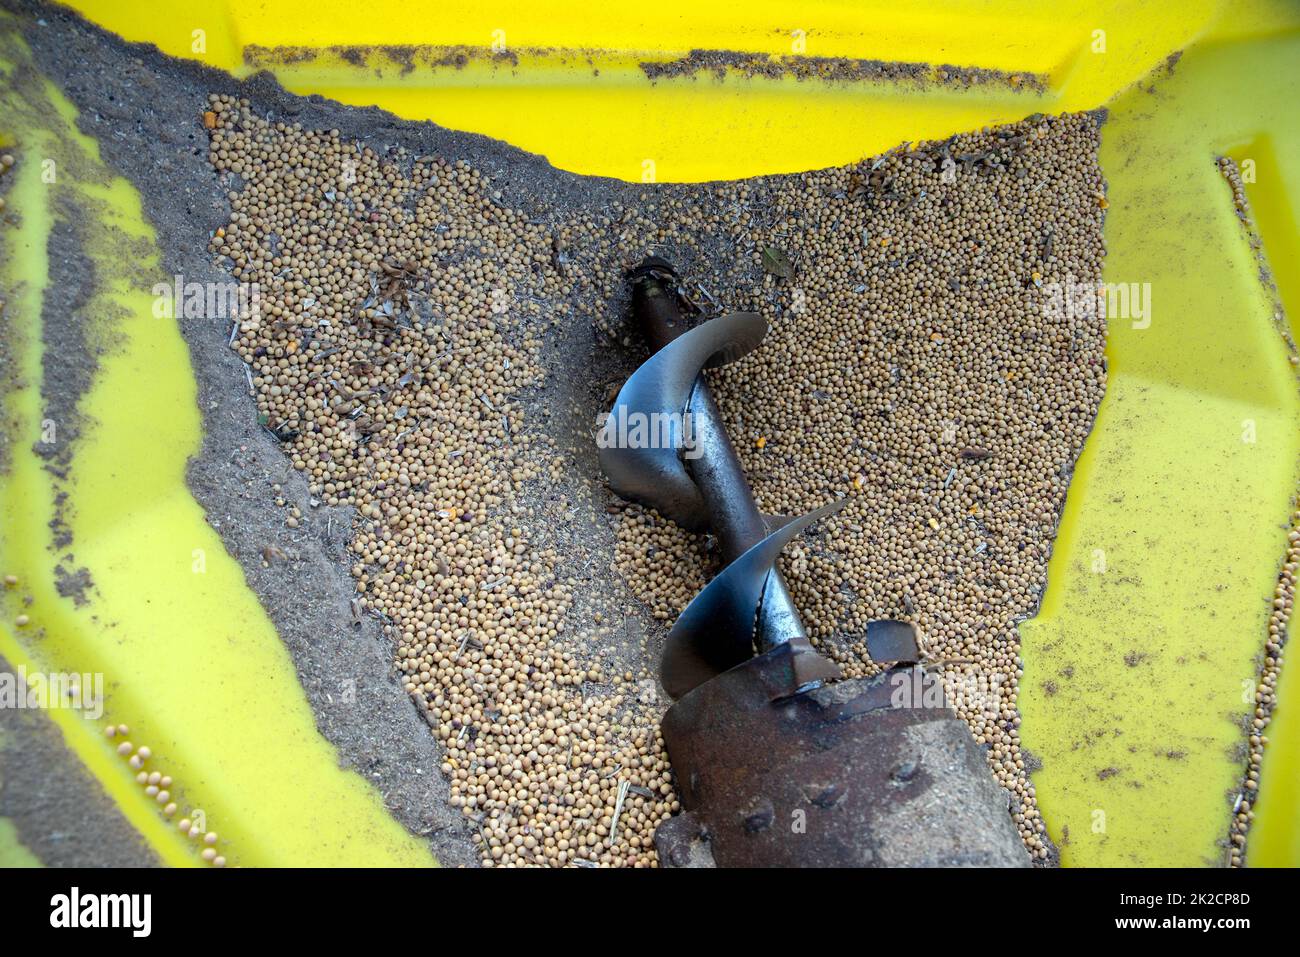 Yellow hopper full of harvested soy beans and corkscrew conveyor Stock Photo